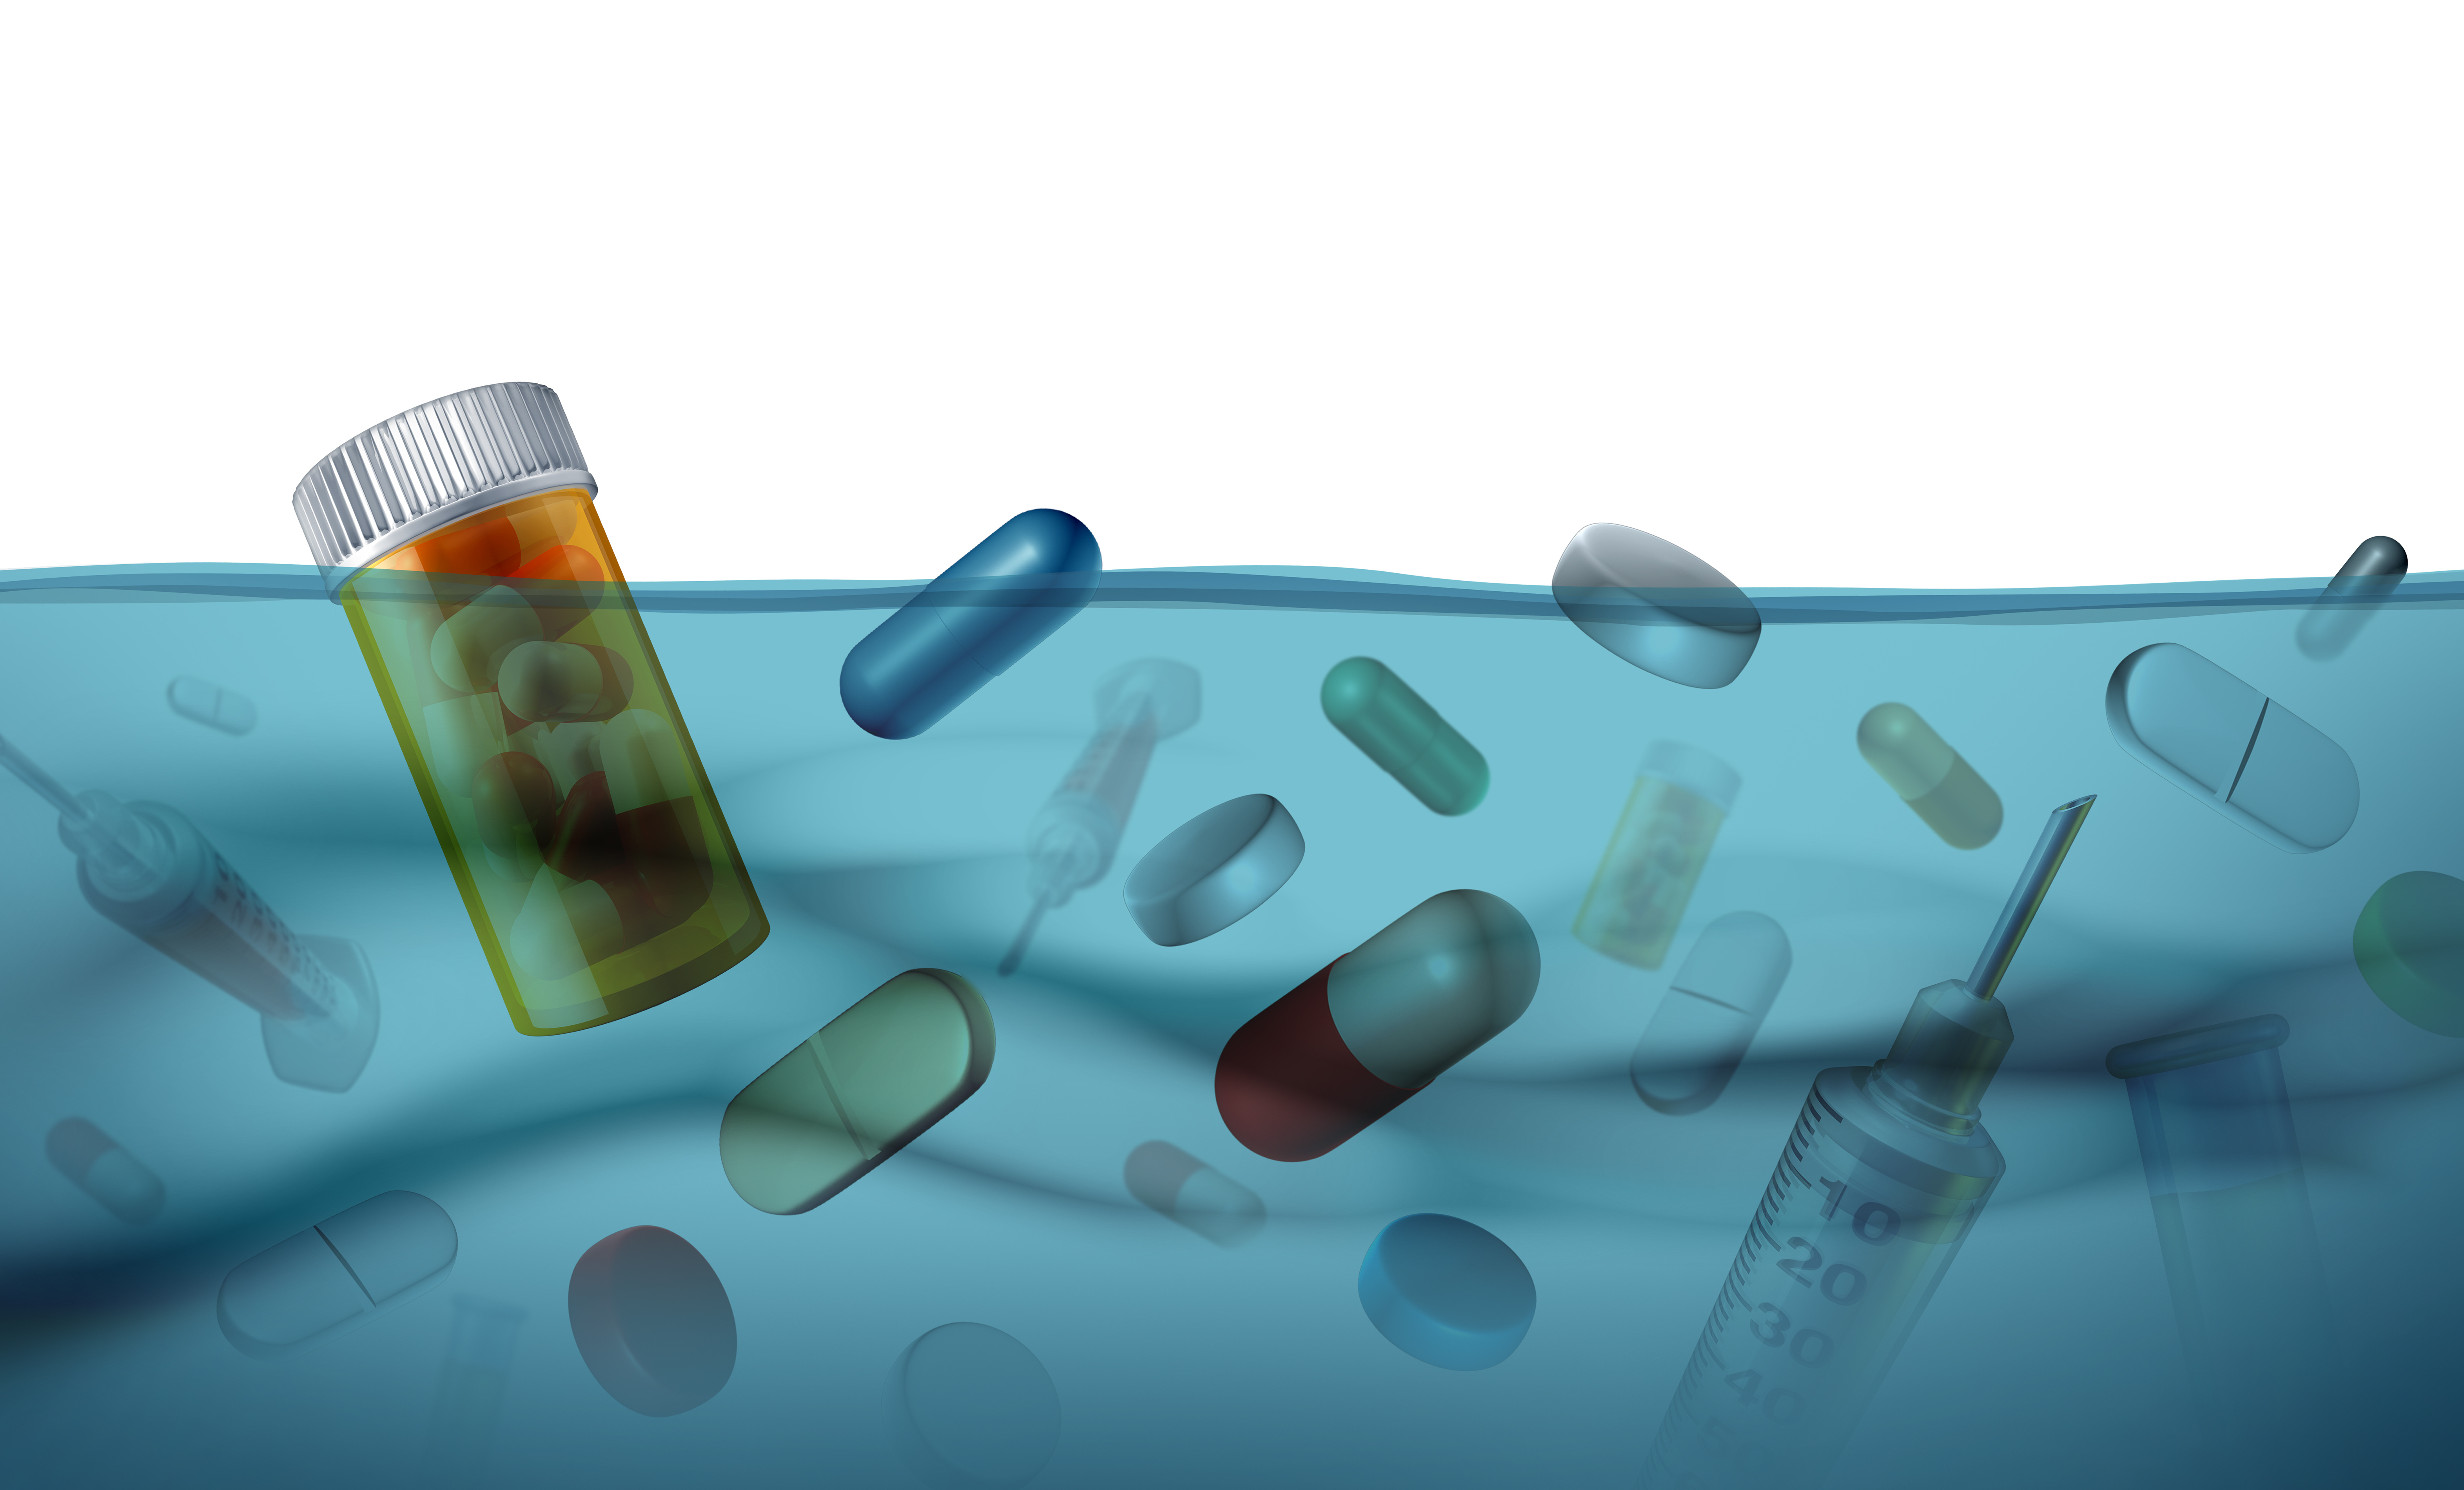 When pharmaceutical drugs become environmental pollutants